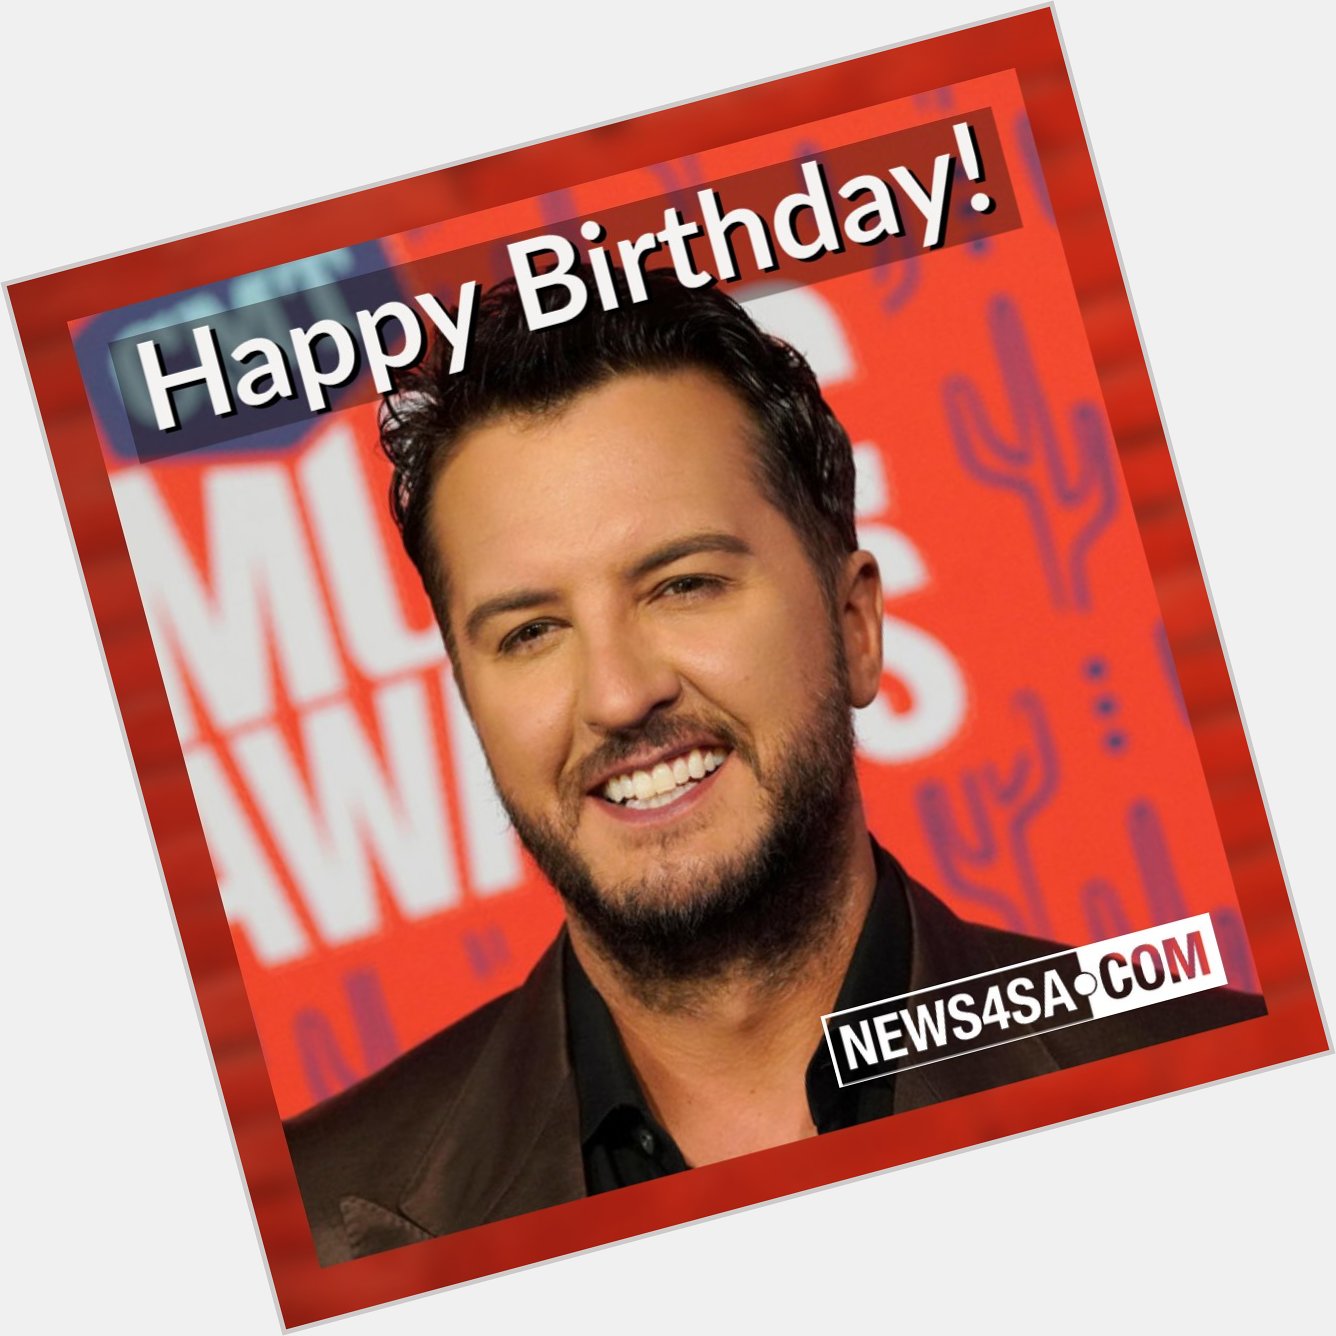 Country singer Luke Bryan turned 45 today! Join us in wishing him a very Happy Birthday! 